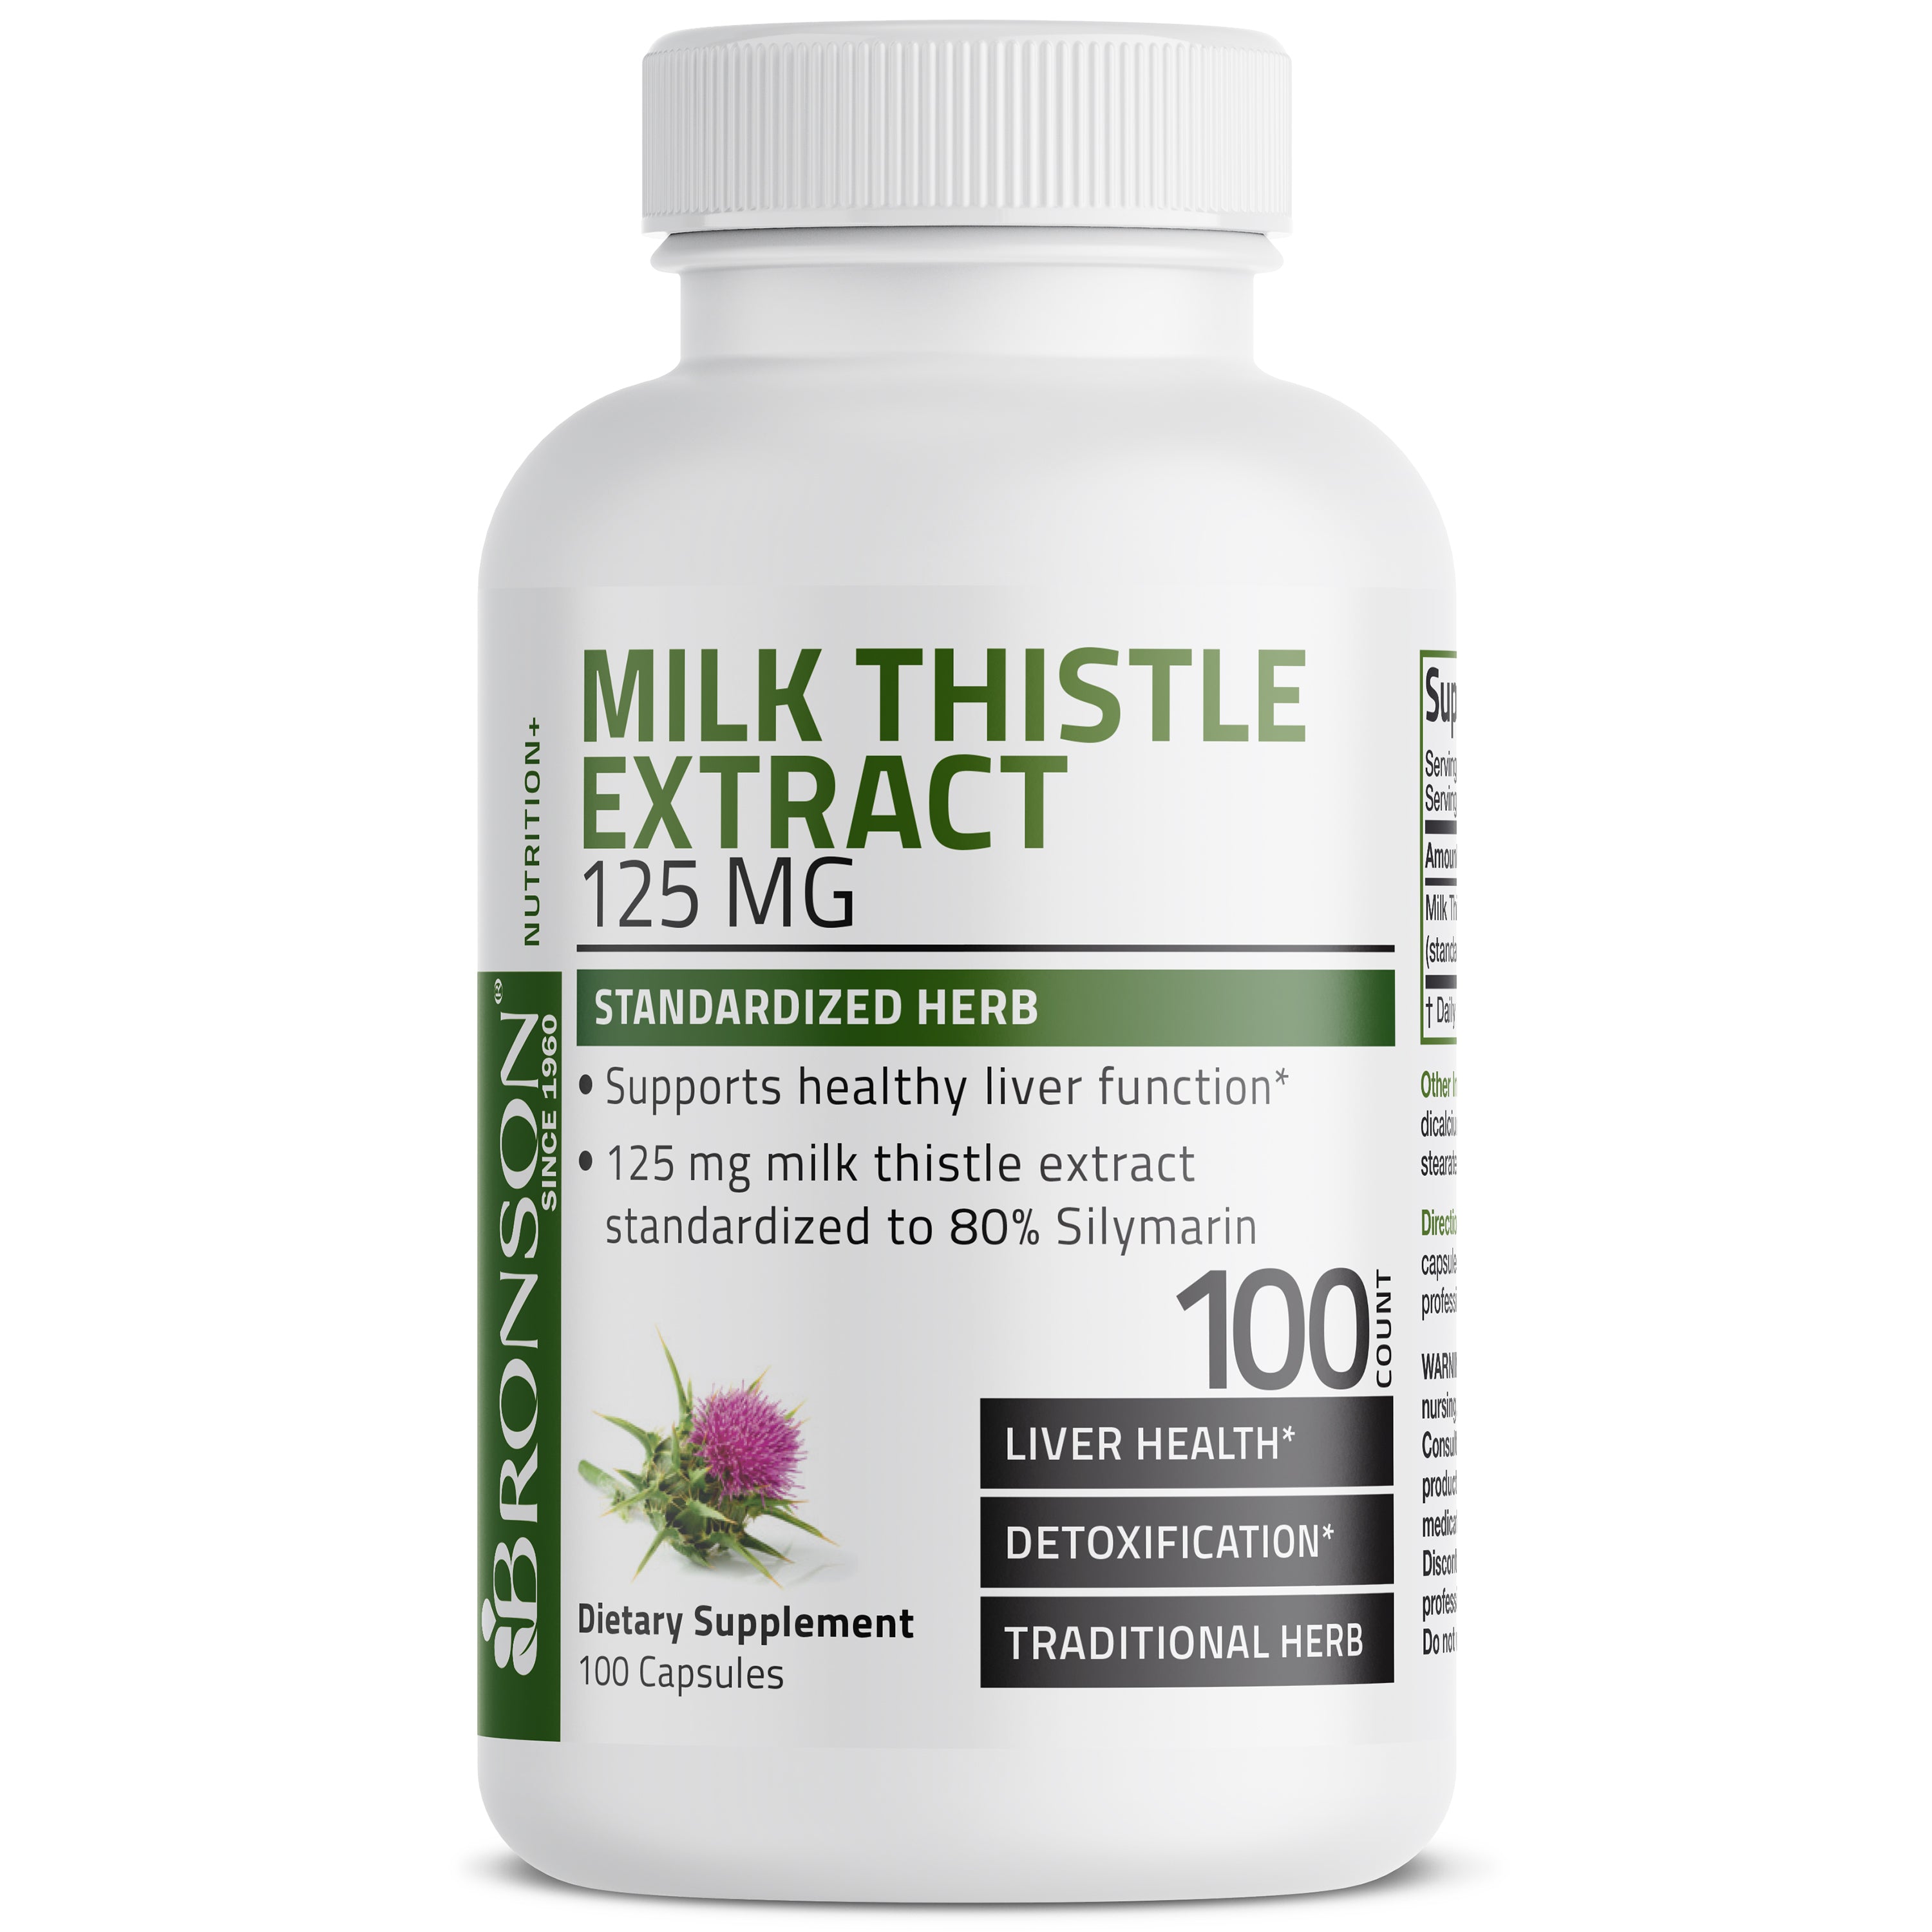 Standardized Milk Thistle Seed Extract Silymarin - 125 mg - 100 Capsules view 1 of 4